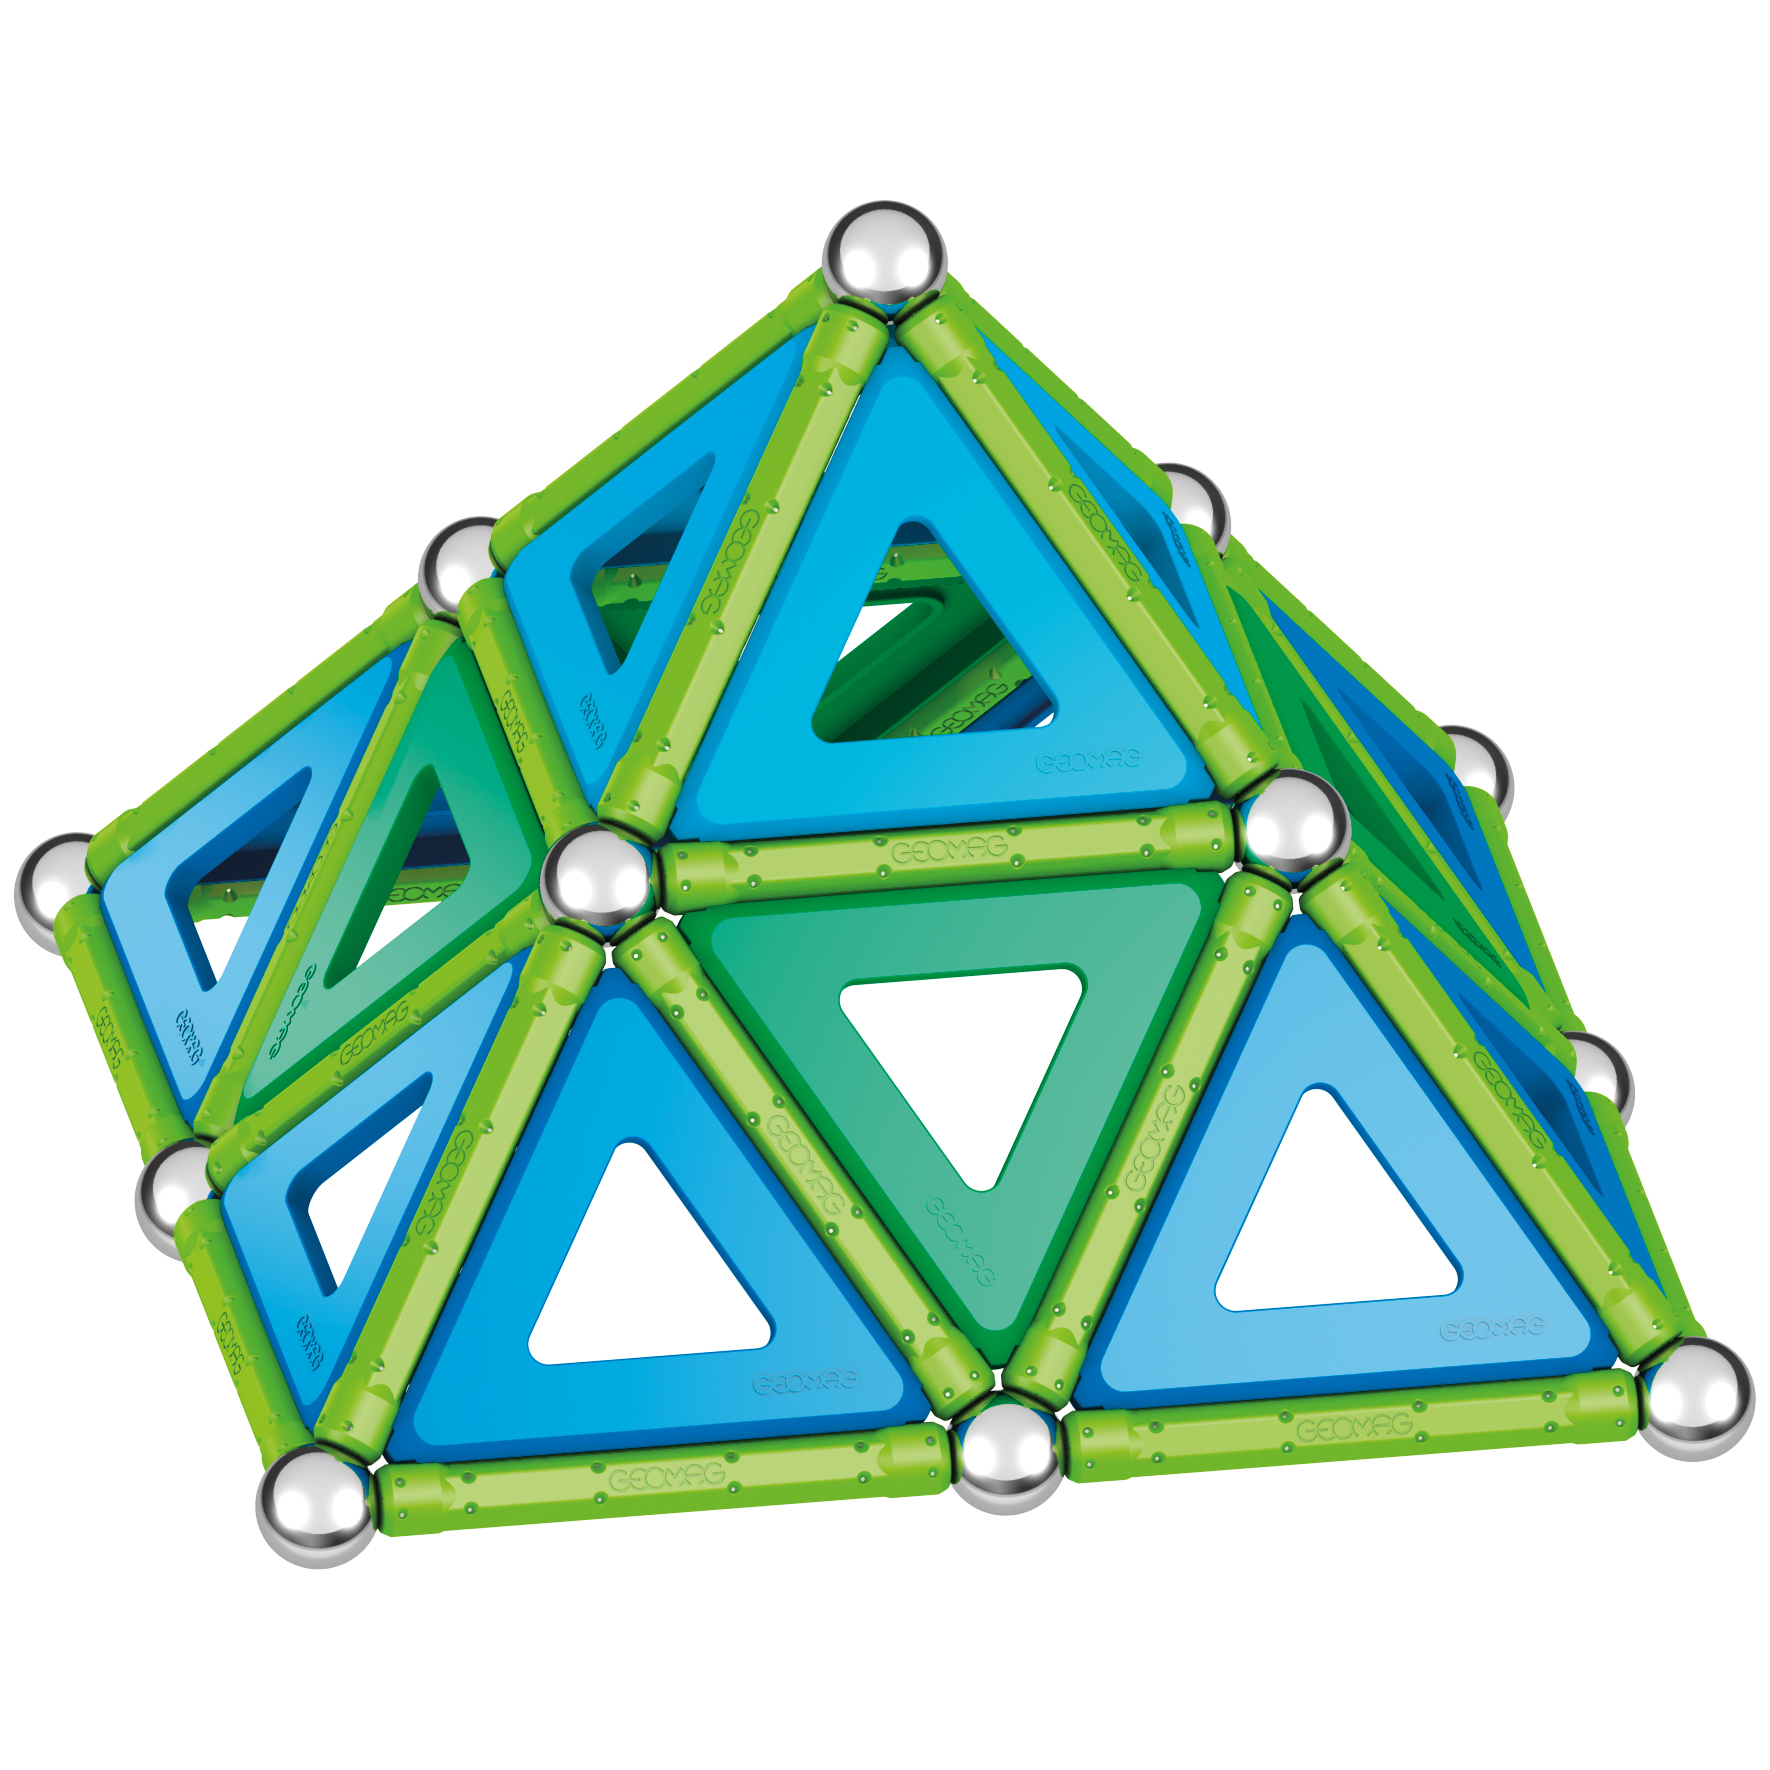 Geomag Geomag Green Line Panels, 114 Pieces image number null